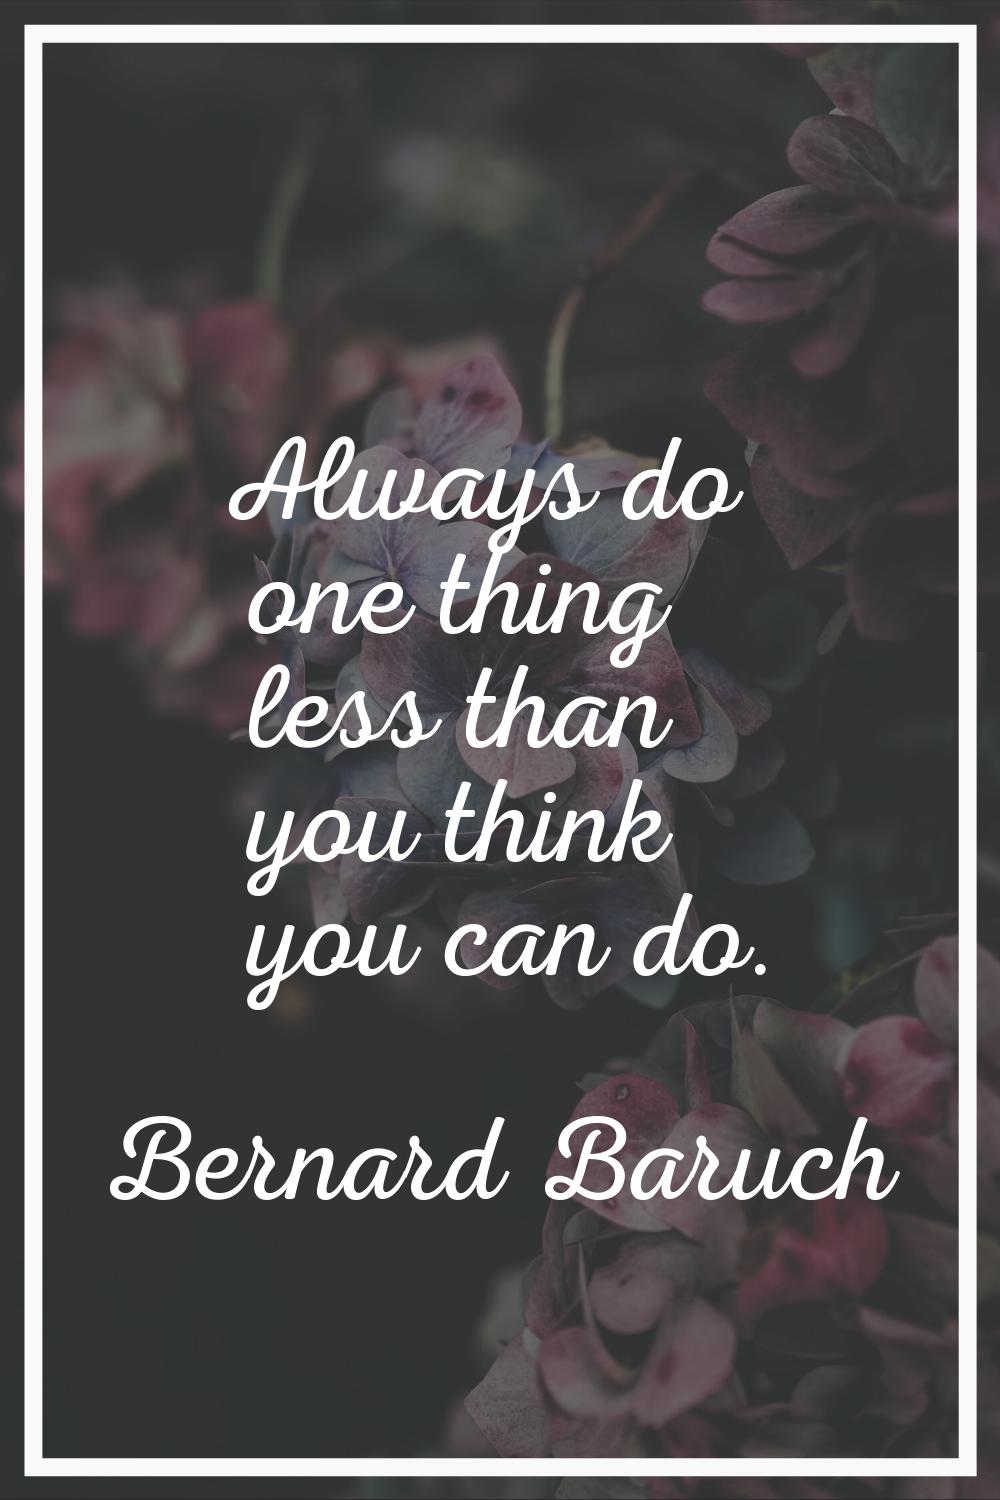 Always do one thing less than you think you can do.